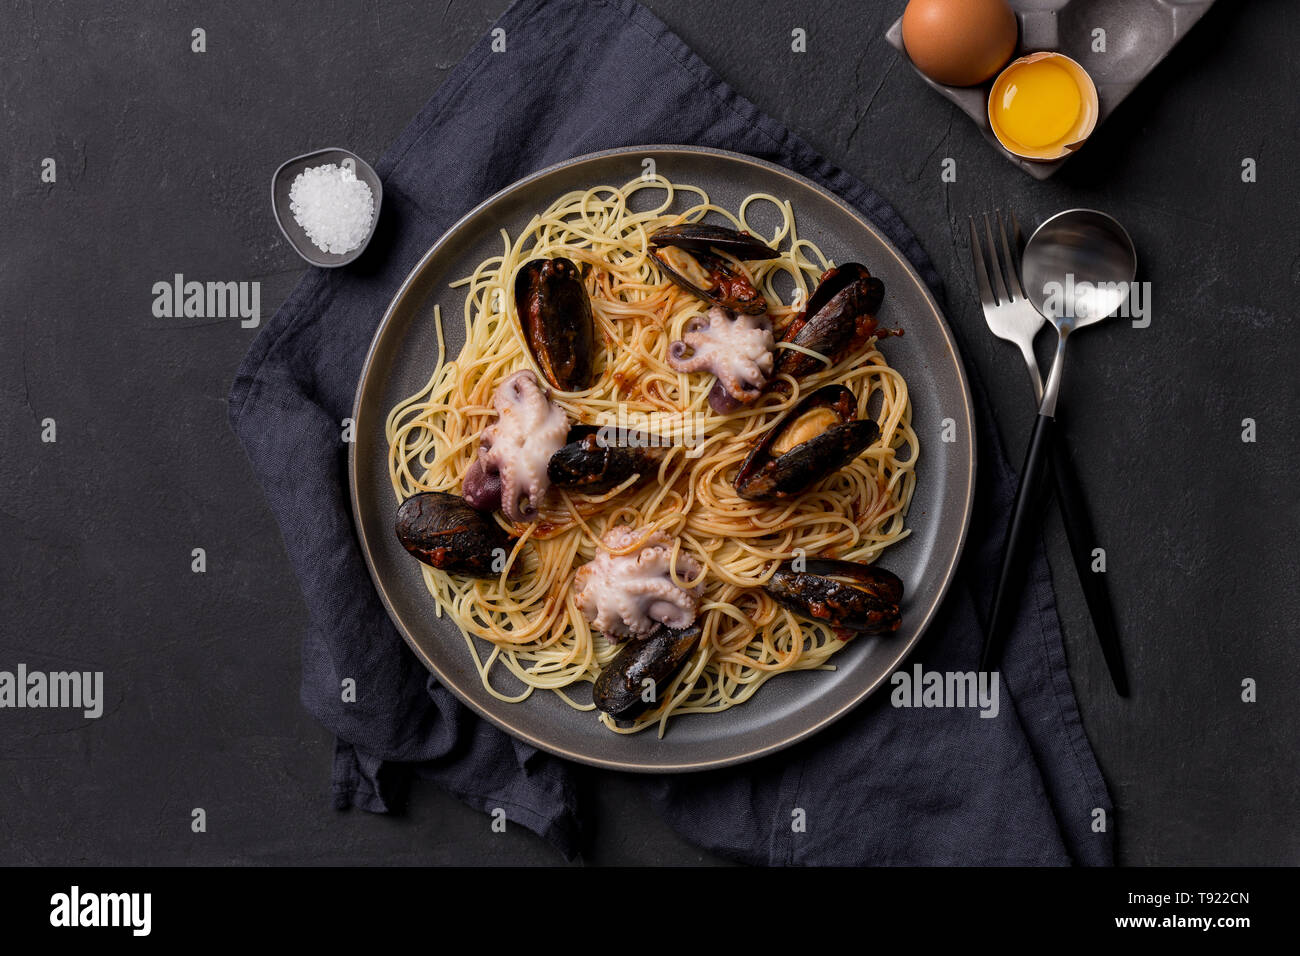 Tasty pasta with octopus and mussels on gray plate with tableware, napkin, salt and chicken egg on gray background Stock Photo